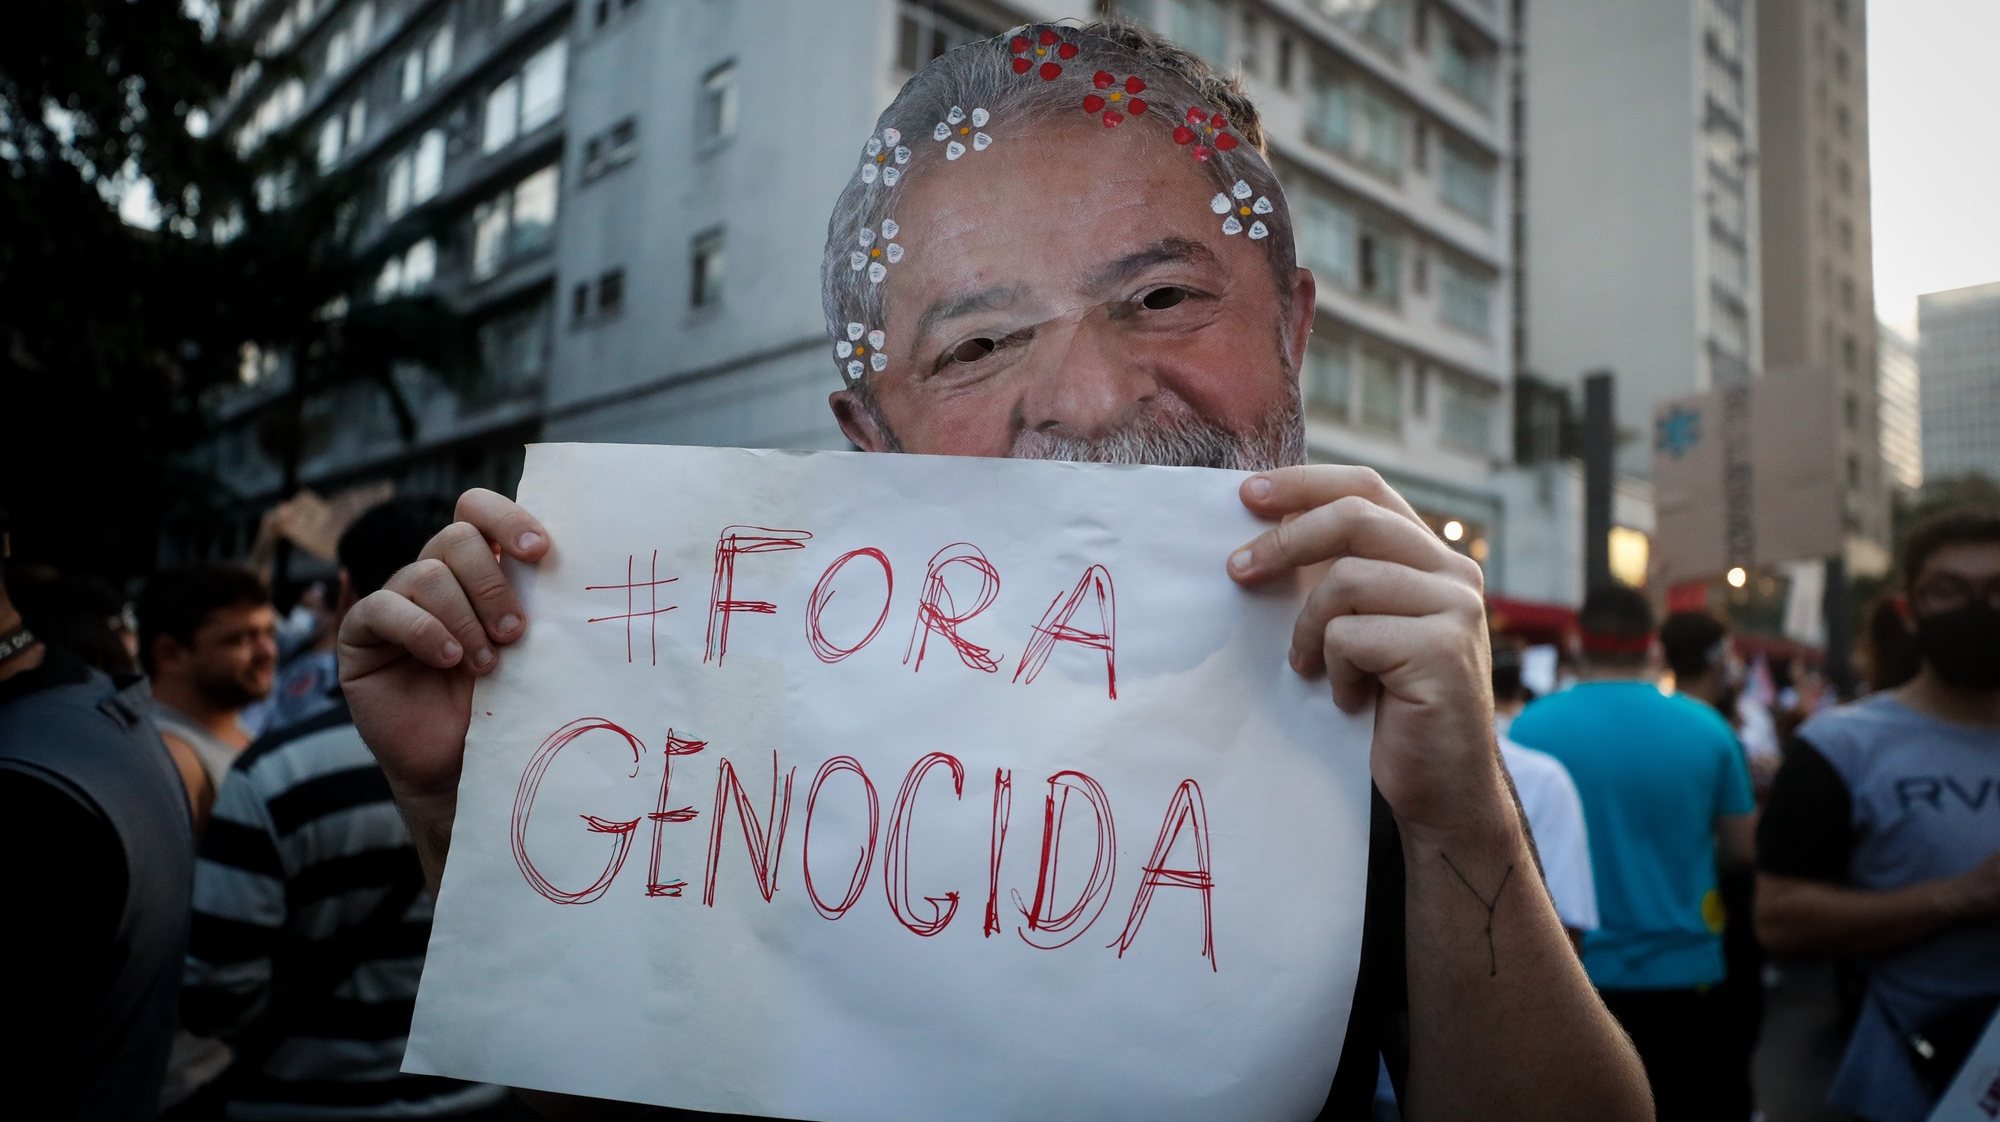 epa09236293 A man wearing a mask of former Brazilian President Luiz Inacio Lula da Silva holds a placard reading &#039;#Out, Genocidal&#039; during a protest against Brazilian President Jair Bolsonaro and his handling of the COVID-19 pandemic crisis, in Sao Paulo, Brazil, 29 May 2021.  EPA/Fernando Bizerra